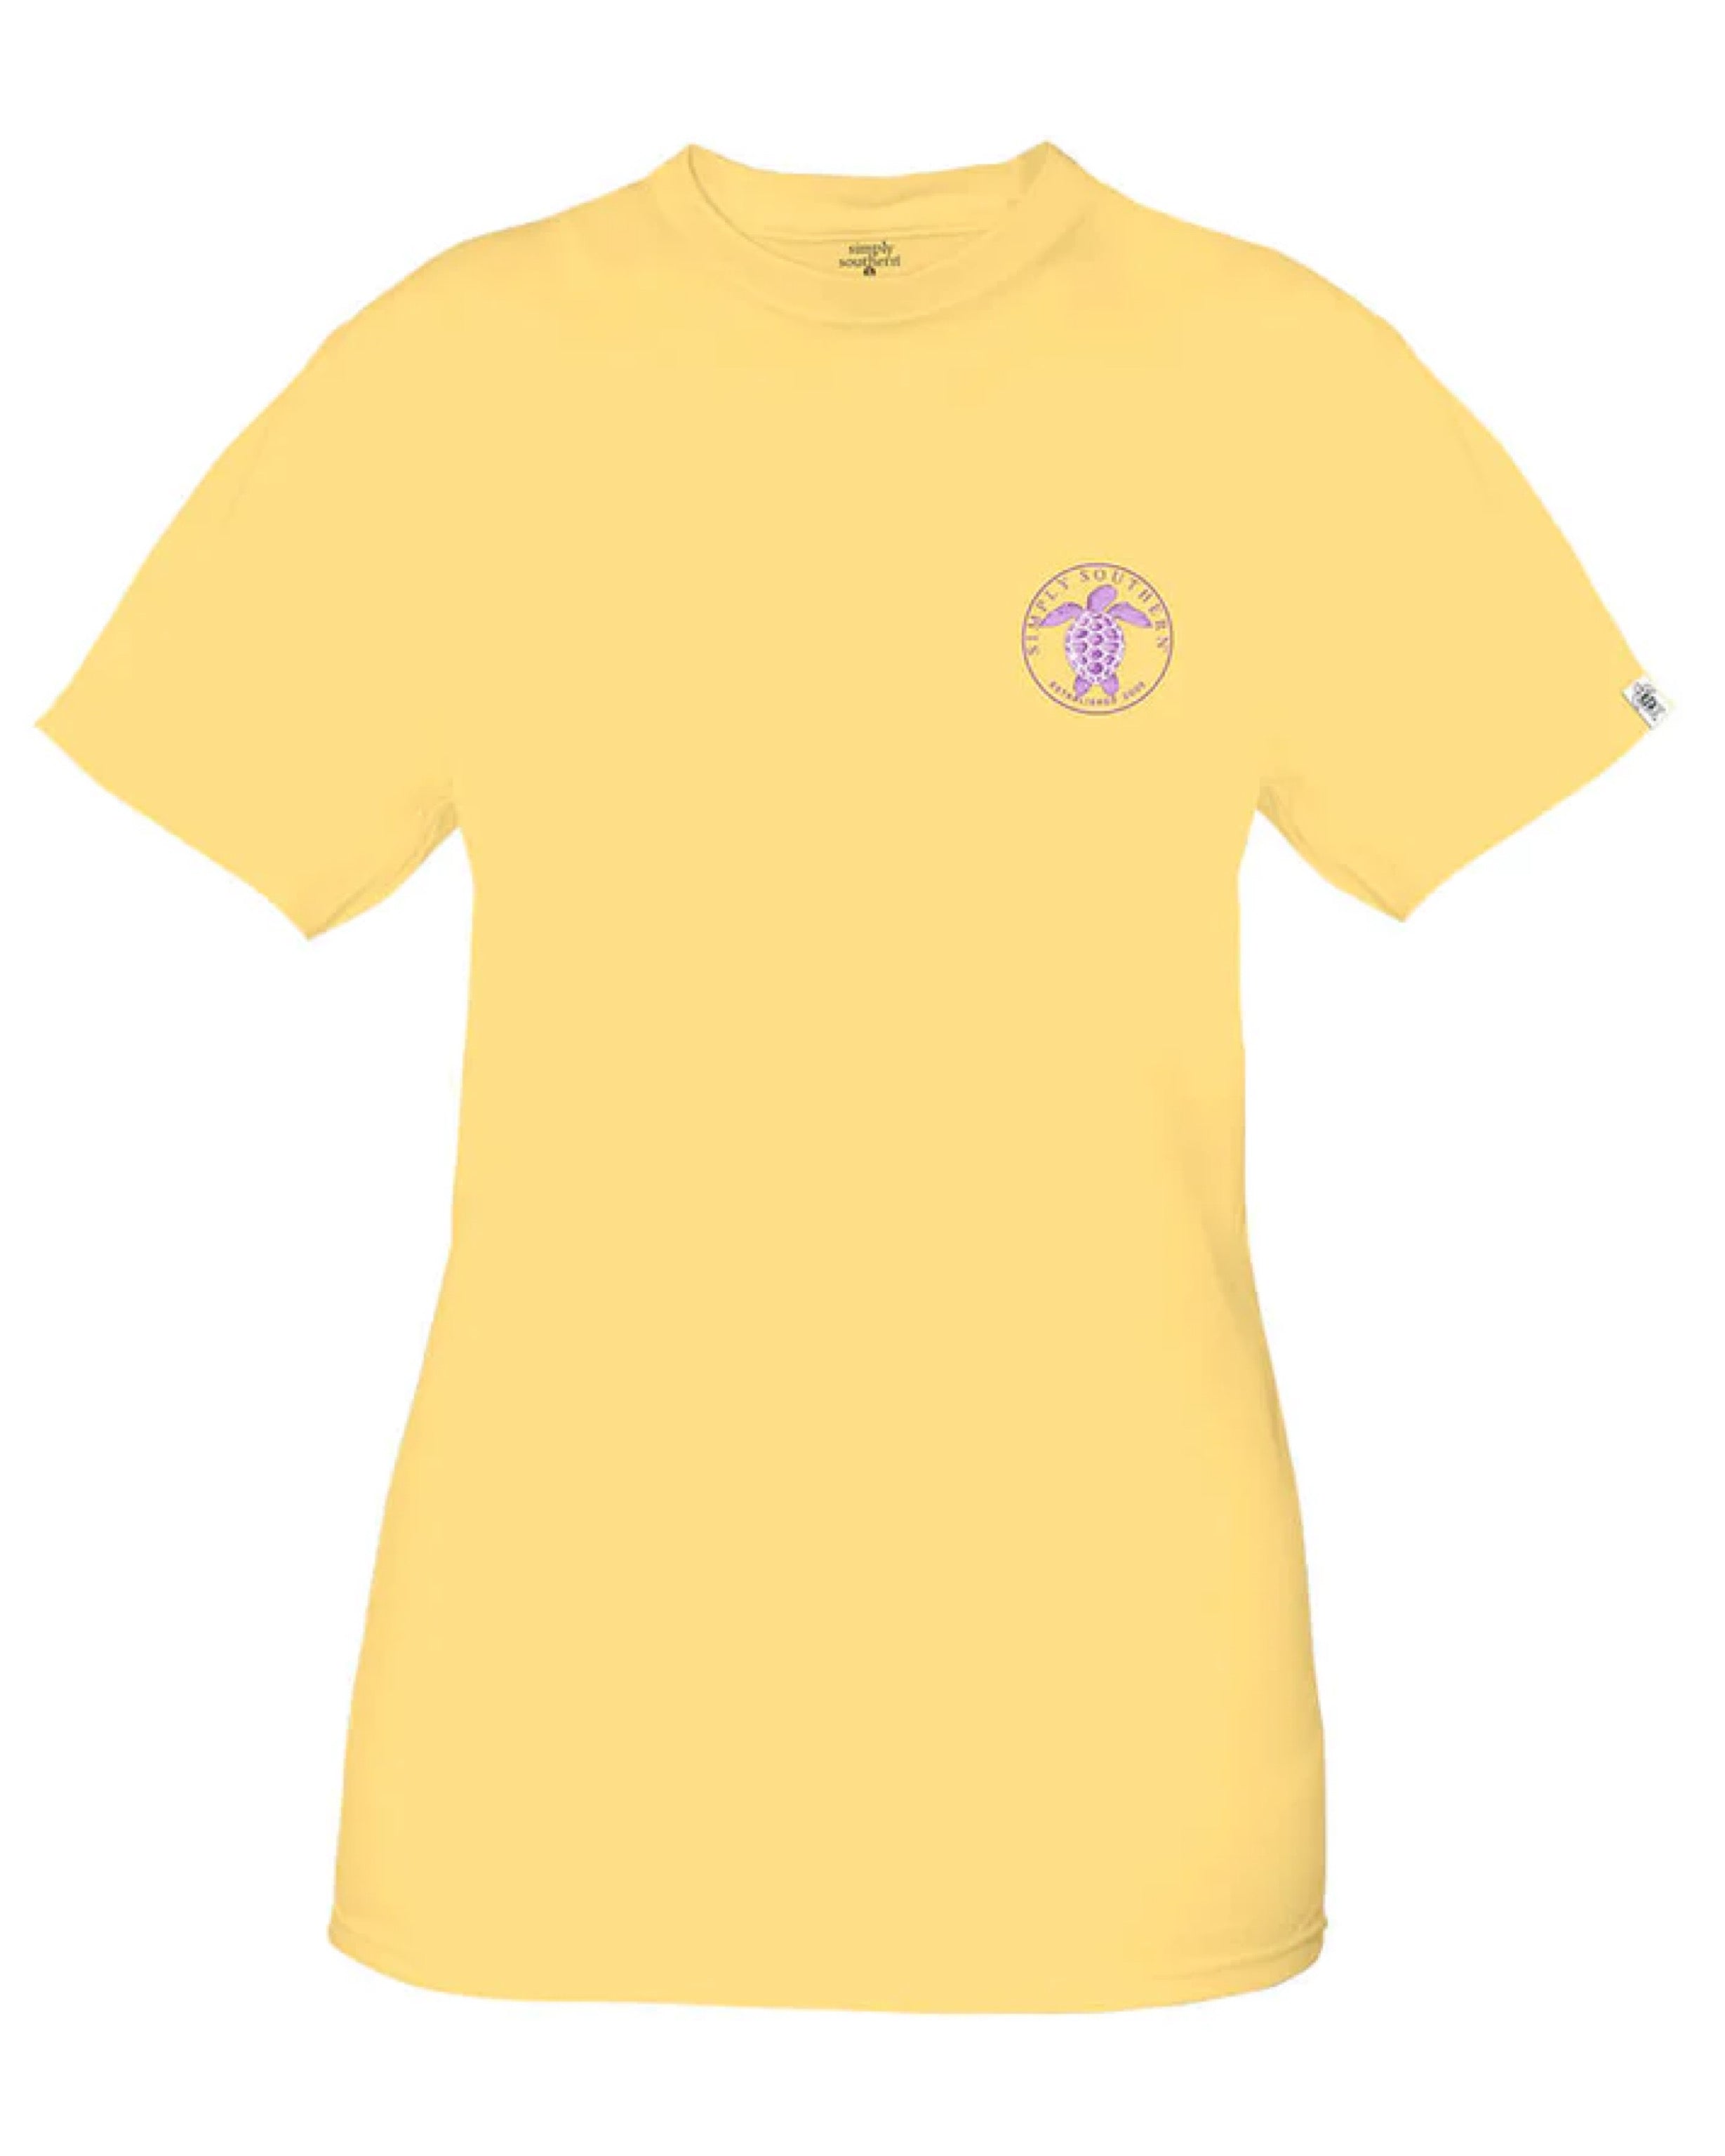 “Thick" Short Sleeve Tee by Simply Southern